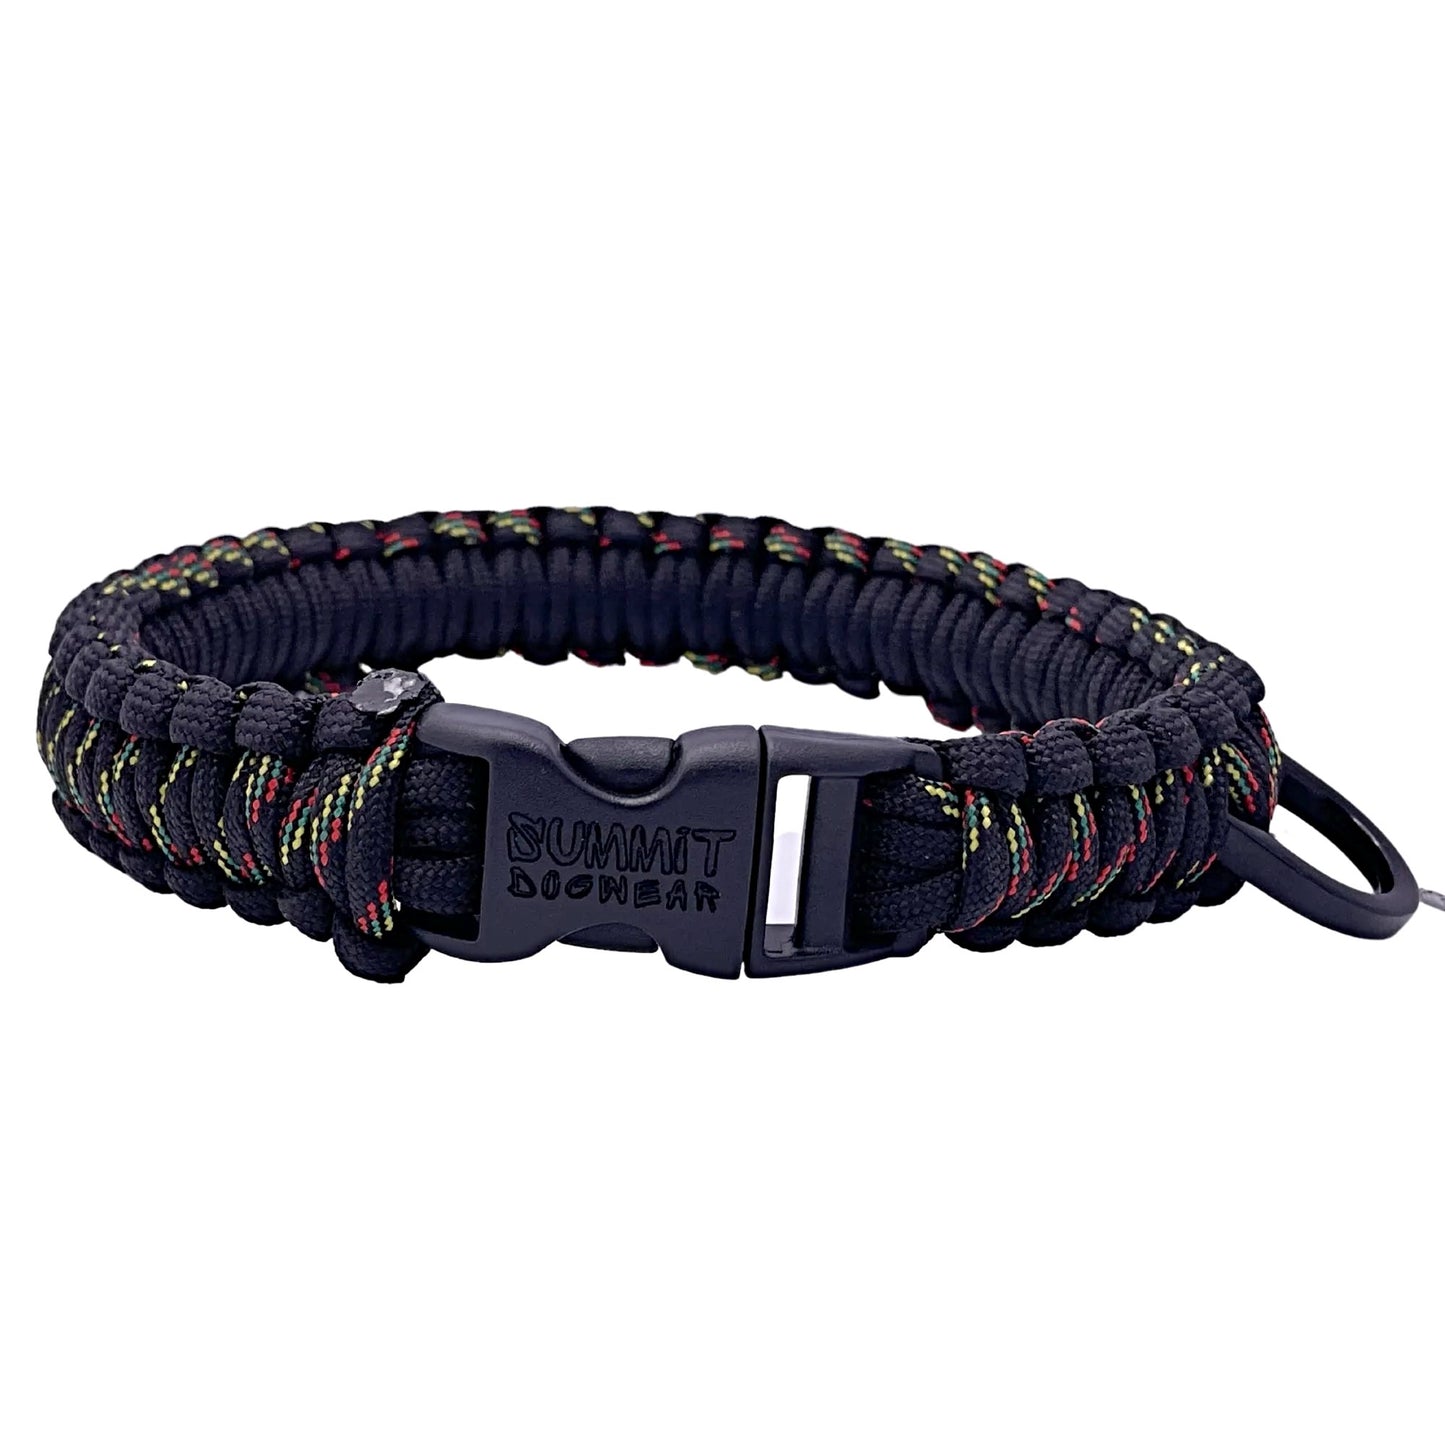 Strong Small dog paracord collar in black with rasta stitching non adjustable and branded buckle